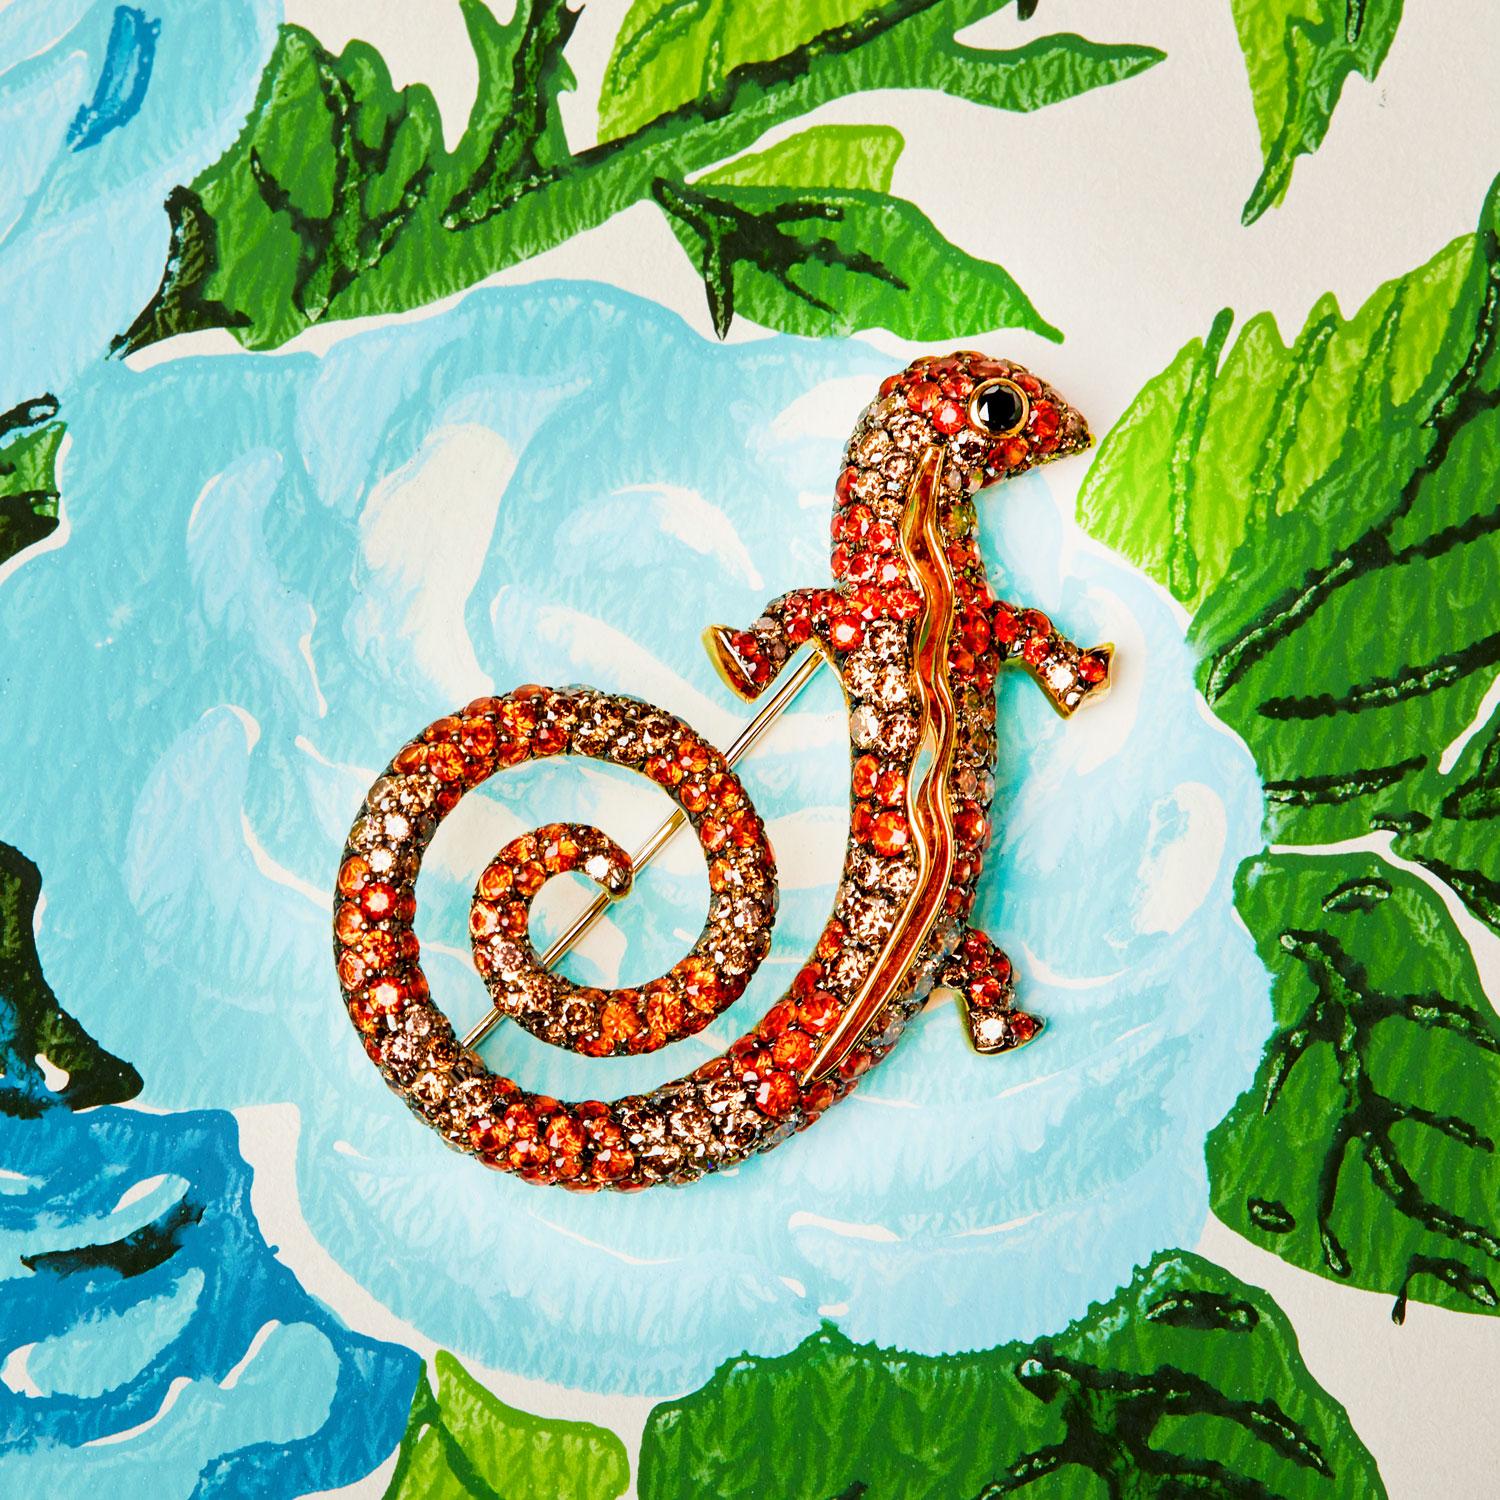 Originally from Rome, where he collaborated with Bulgari on custom work, Michele della Valle is now based in Geneva. This distinctive brooch, designed as a gecko with a curled tail, is set with alternating bands of orange sapphires and brownish